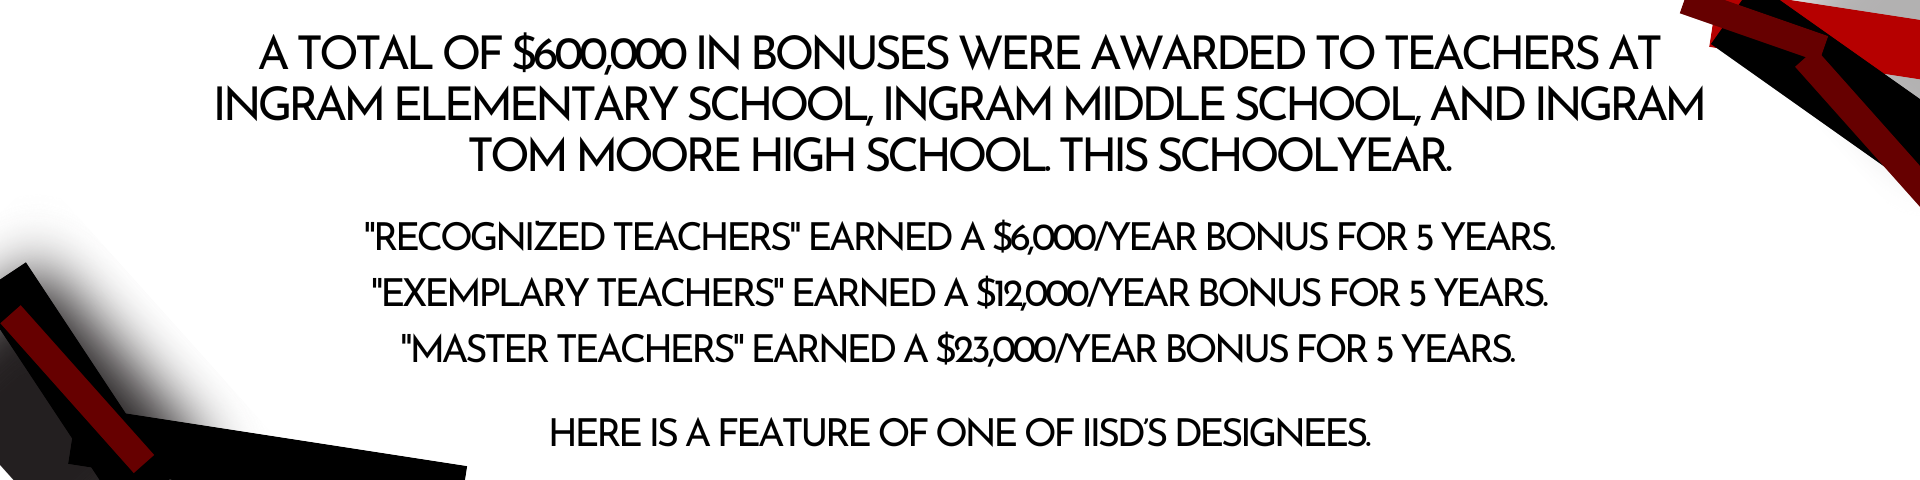 Header Describing Teacher Incentive Allotment: A total of $600,000 in bonuses were awarded to teachers at Ingram Elementary School, Ingram Middle School, and Ingram Tom Moore High School. this schoolyear.  "Recognized Teachers" earned a $6,000/year bonus for 5 years  "Exemplary Teachers" earned a $12,000/year bonus for 5 years  ﻿"Master Teachers" earned a $23,000/year bonus for 5 years  Here is a feature of one of IISD’s Designees